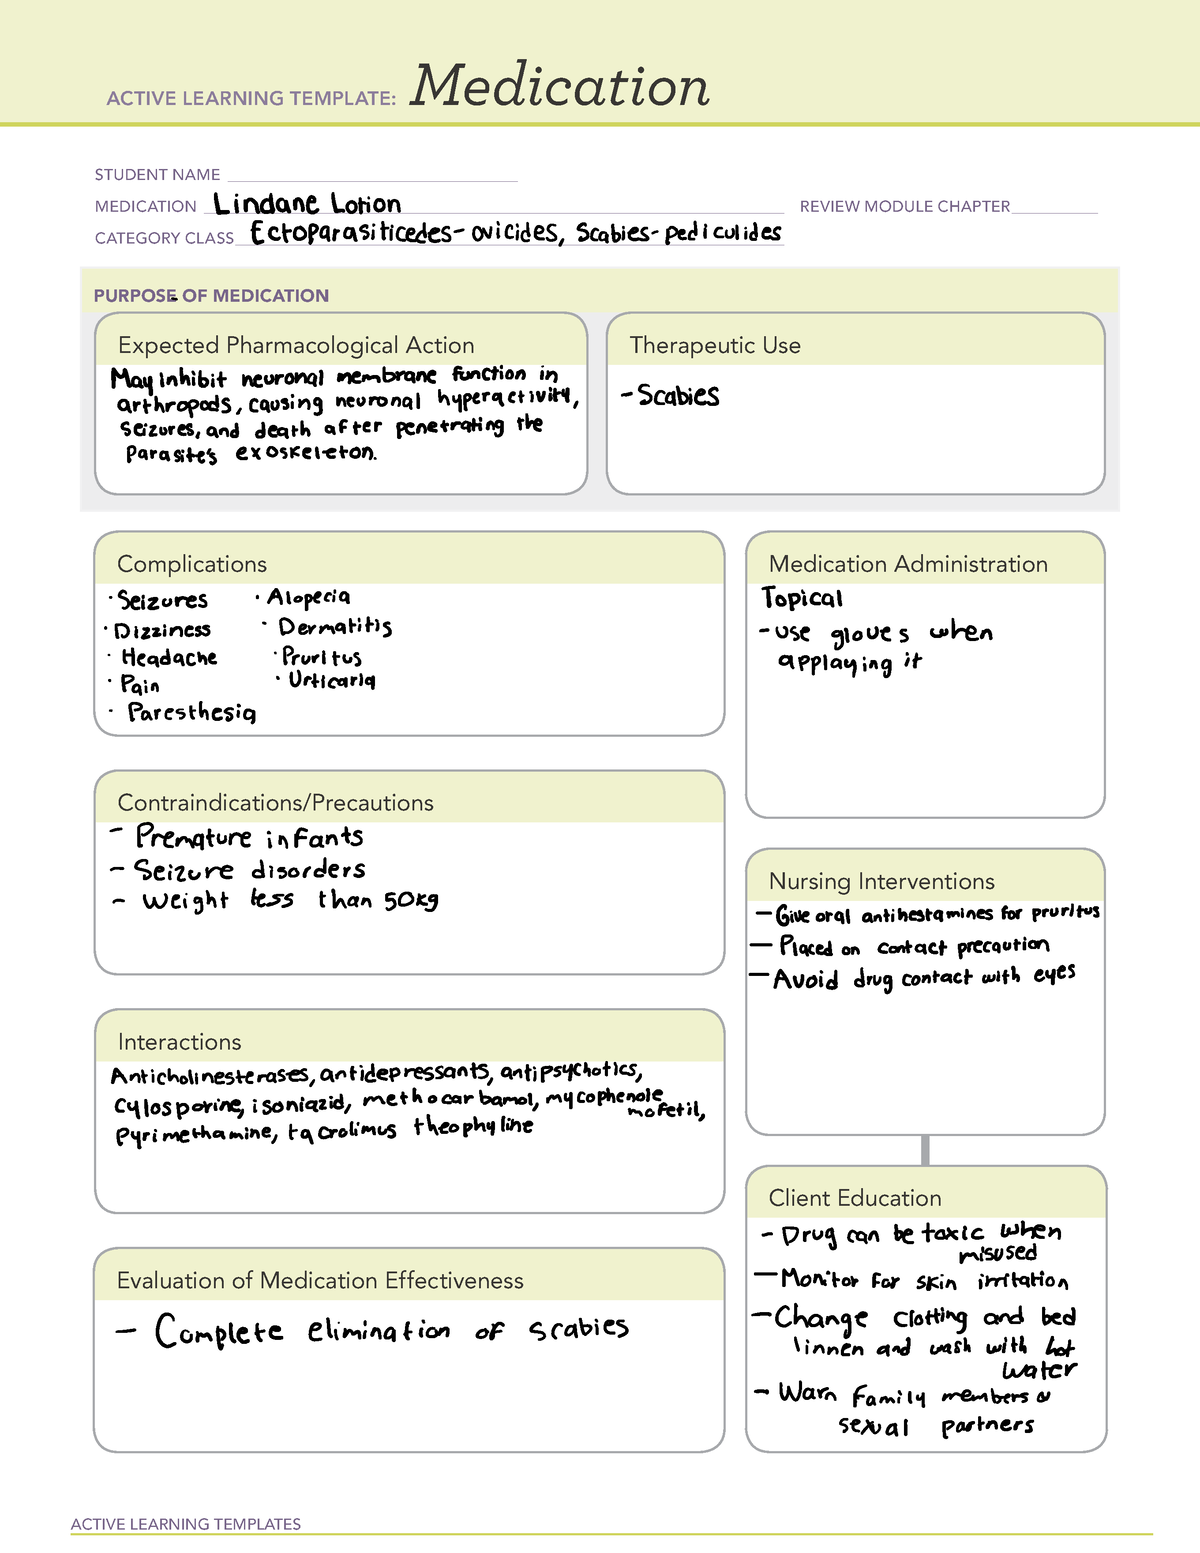 ATI Medication Template Lindane solution ACTIVE LEARNING TEMPLATES